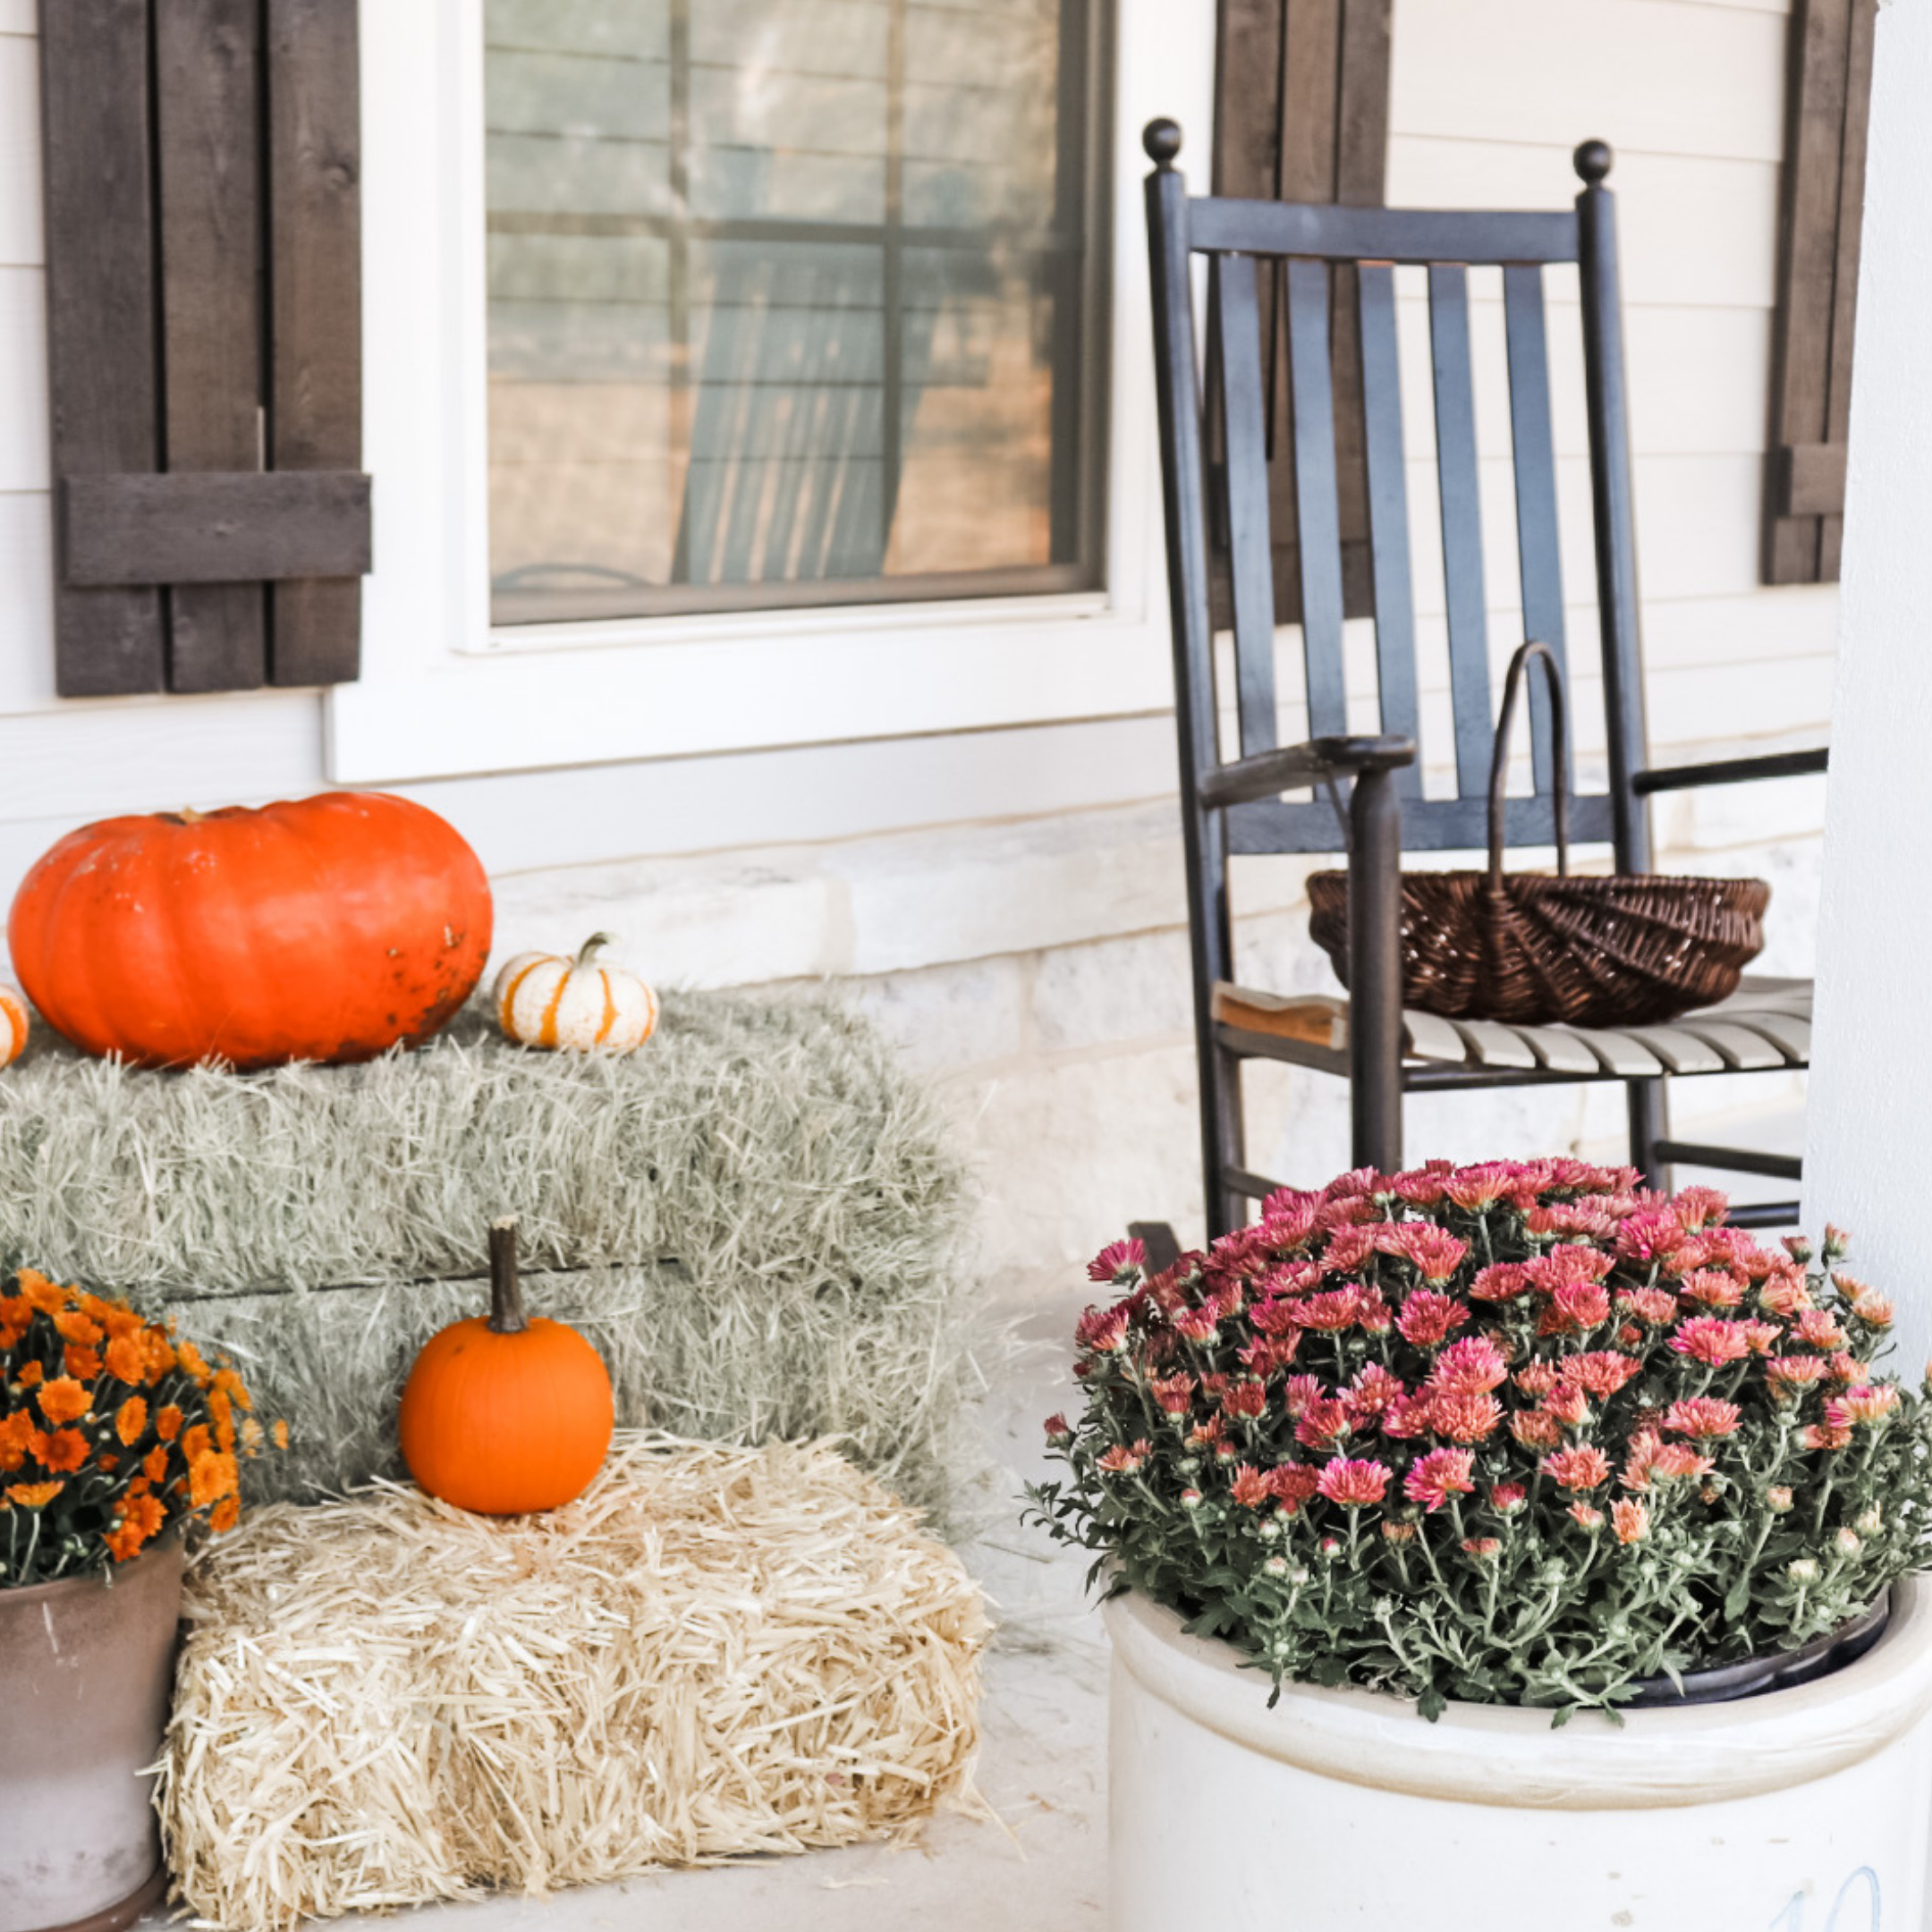 https://thebluebonnethomestead.com/wp-content/uploads/2020/09/Fall-outdoor-decor-mums.png